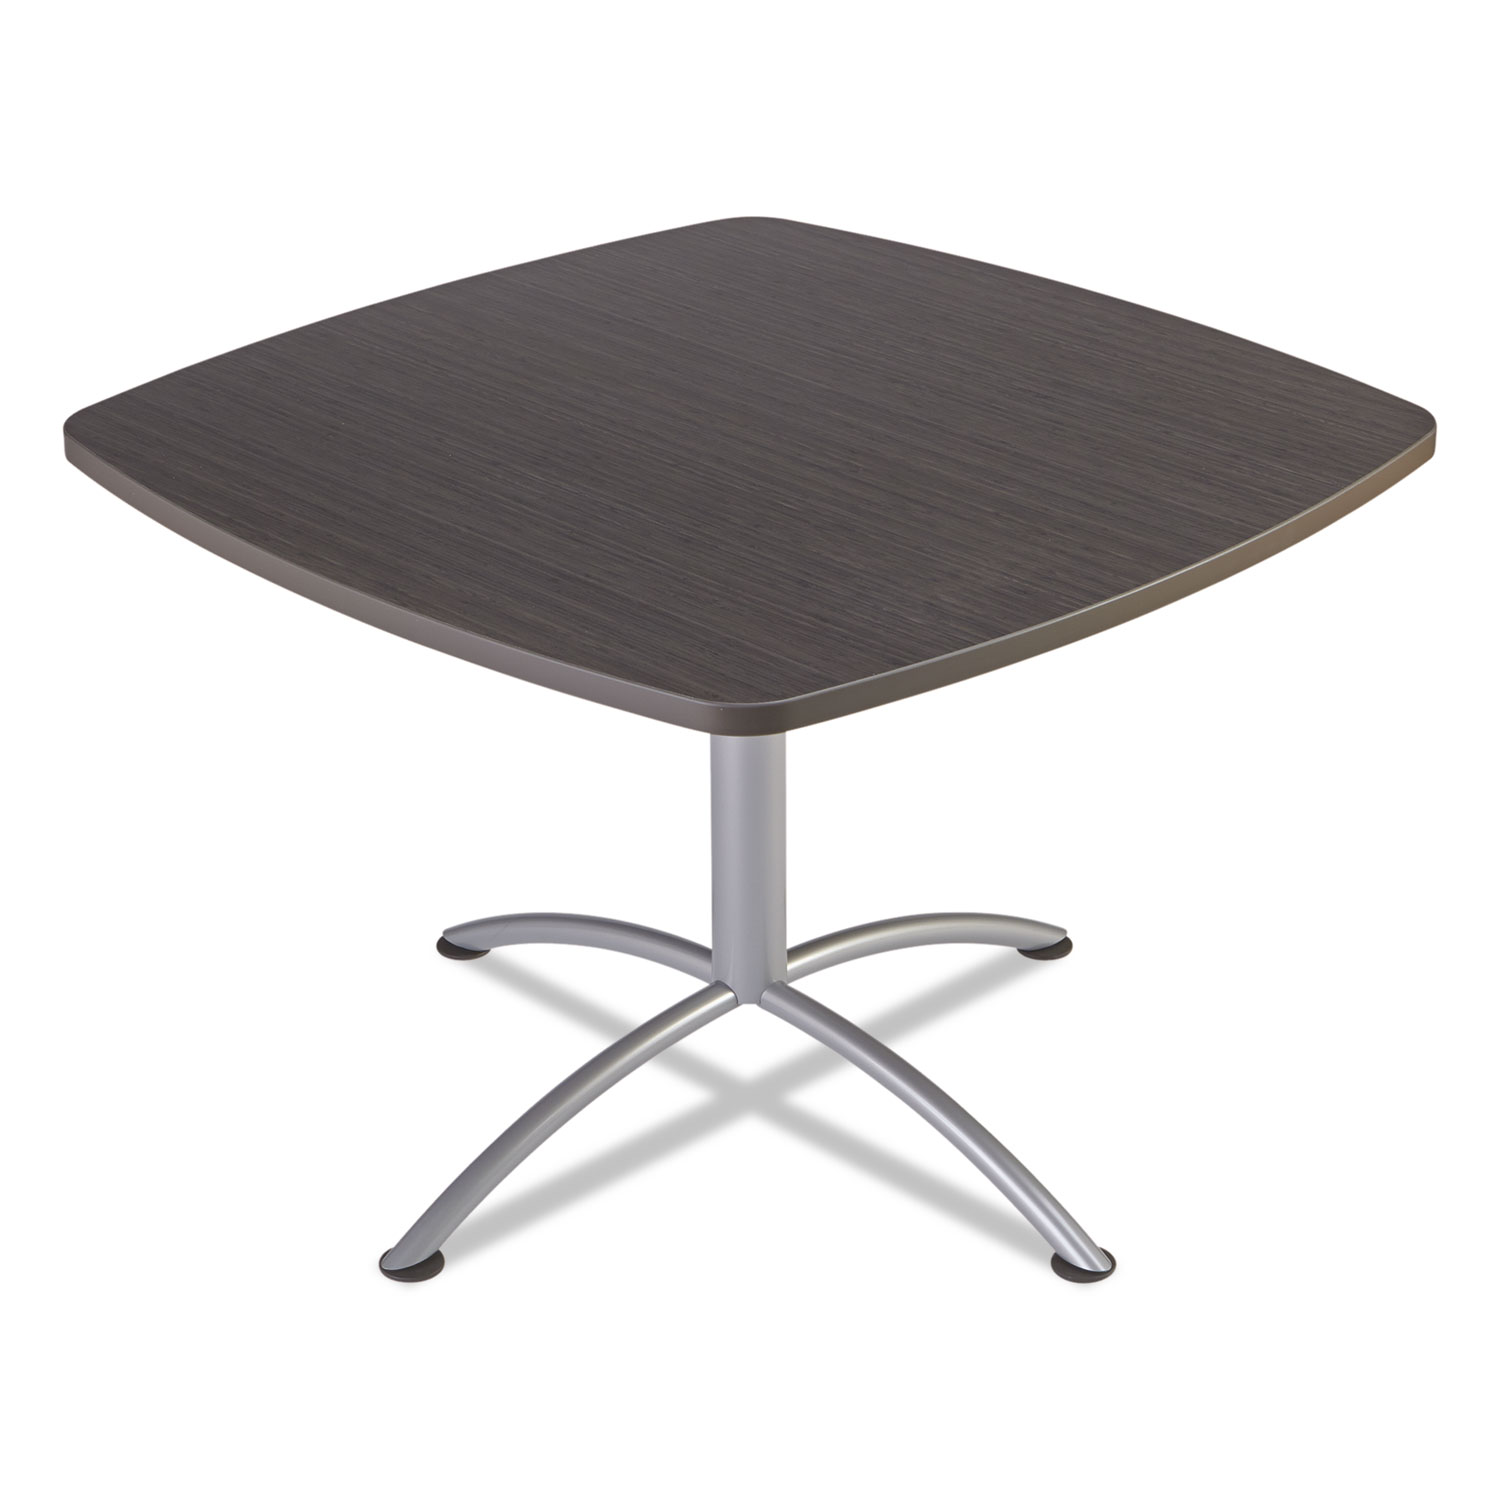 iLand Table, Contour, Square Seated Style, 42 x 42 x 29, Gray Walnut/Silver